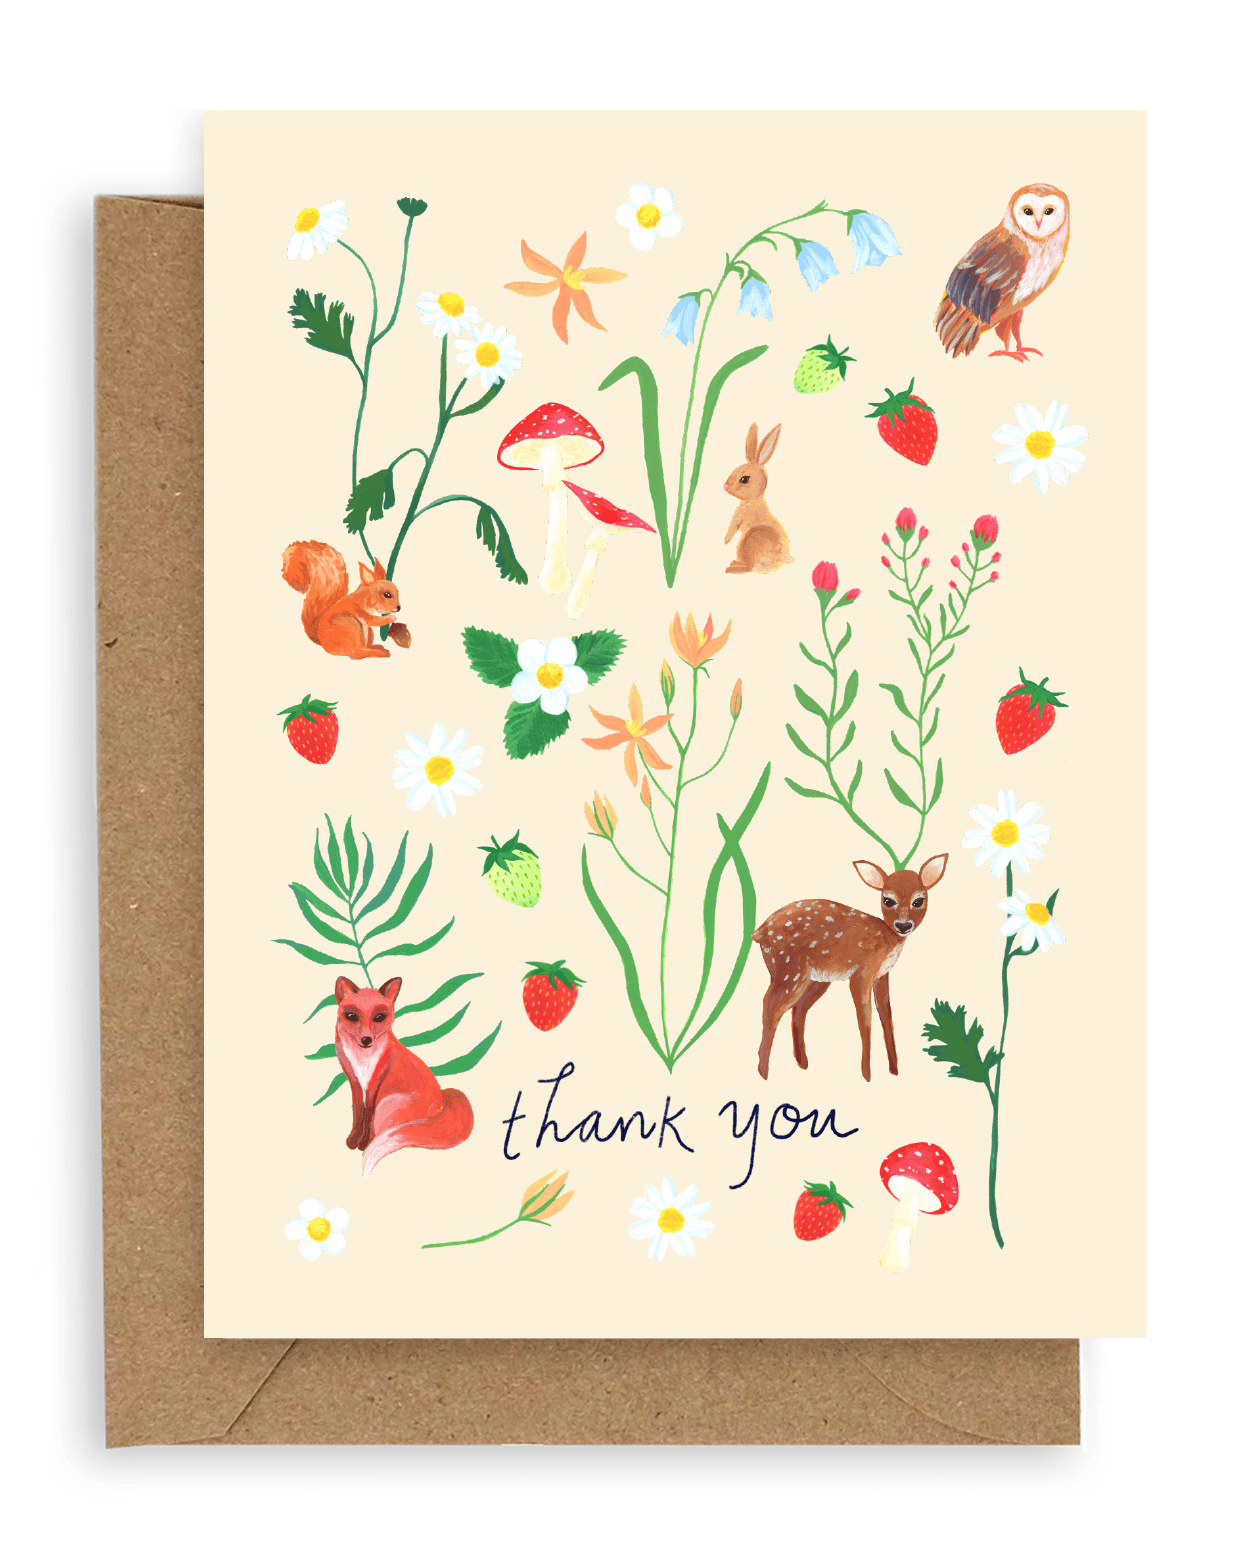 Our exciting new Holiday gift wrap features a stunning array of forest animals and flora. There are Owls, Deer, Rabbits, Squirrels, Foxes, Mushrooms, berries and various kinds of flora with orange, white, red, blue, and yellow blooms above the words "thank you" printed on a cream background. Shown with kraft envelope.